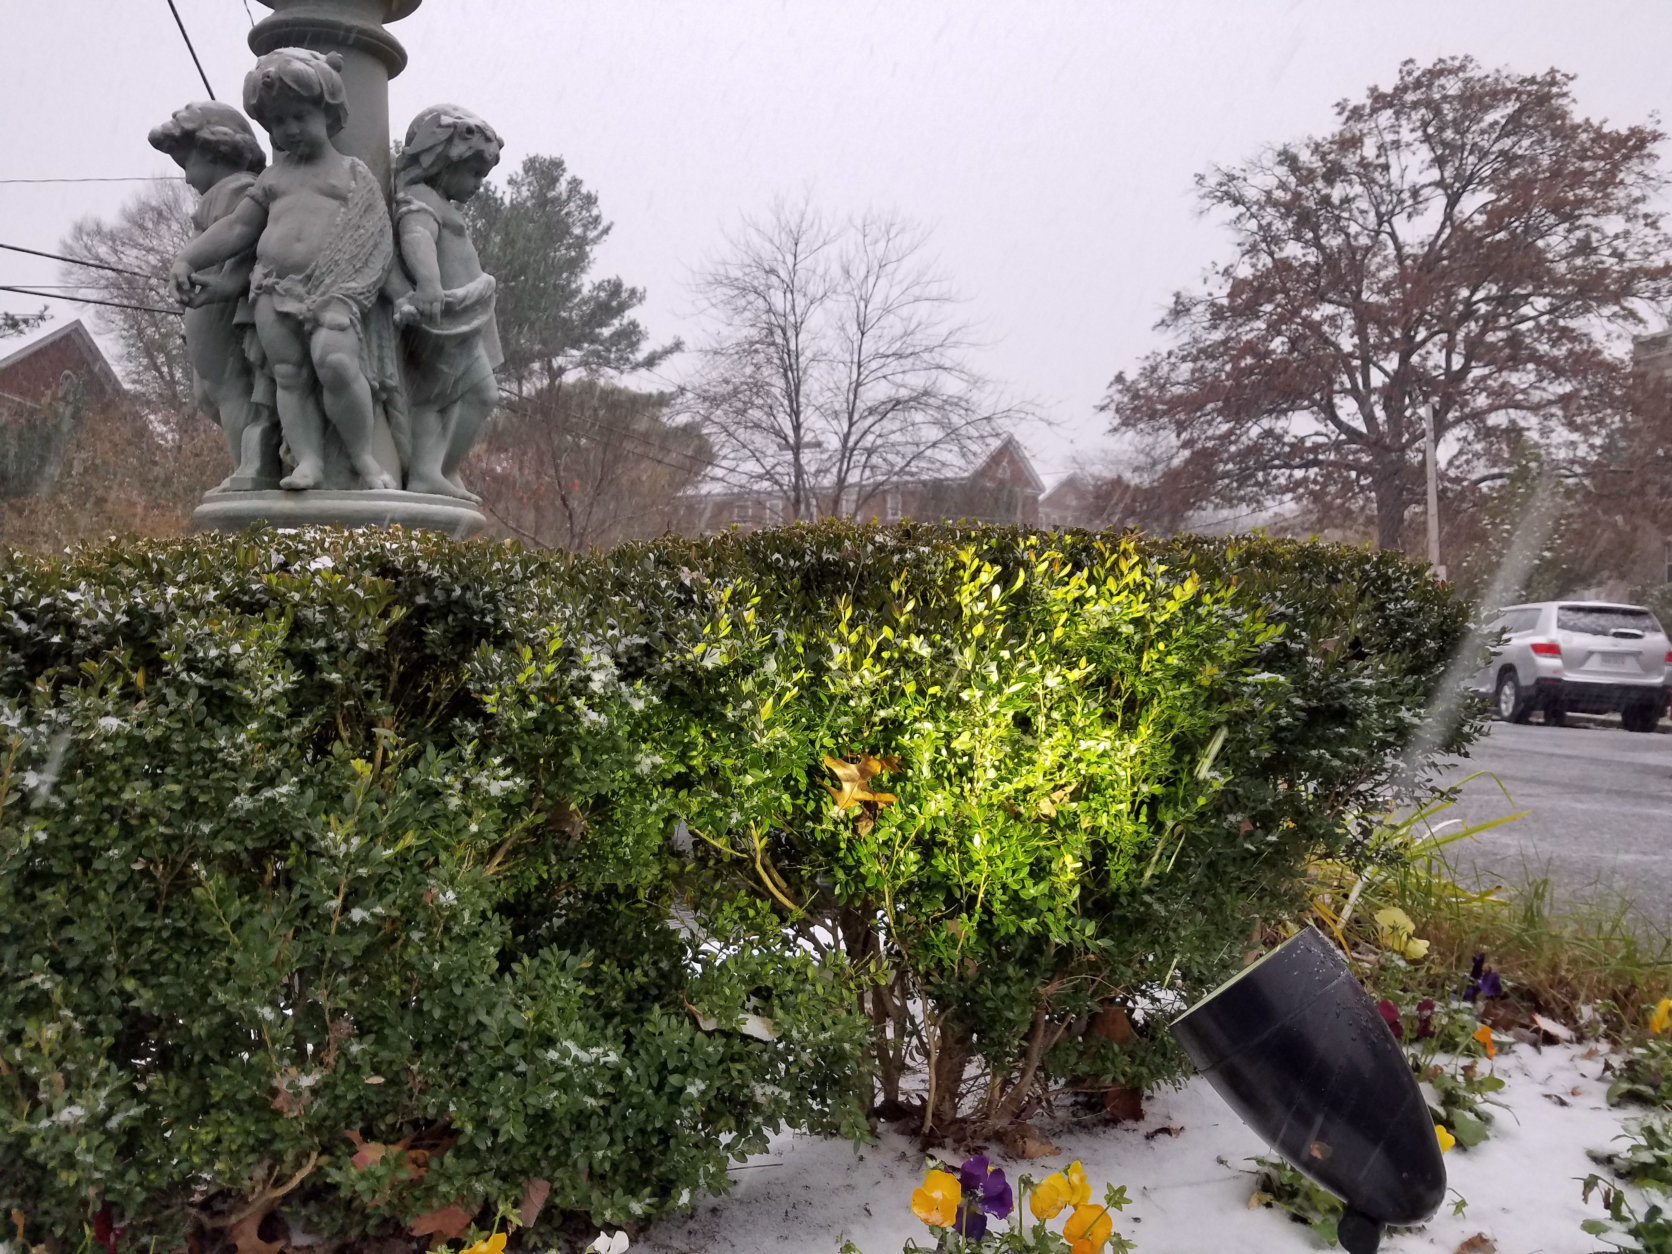 Snow collects on plants and statues in Northwest D.C. (WTOP/Will Vitka)